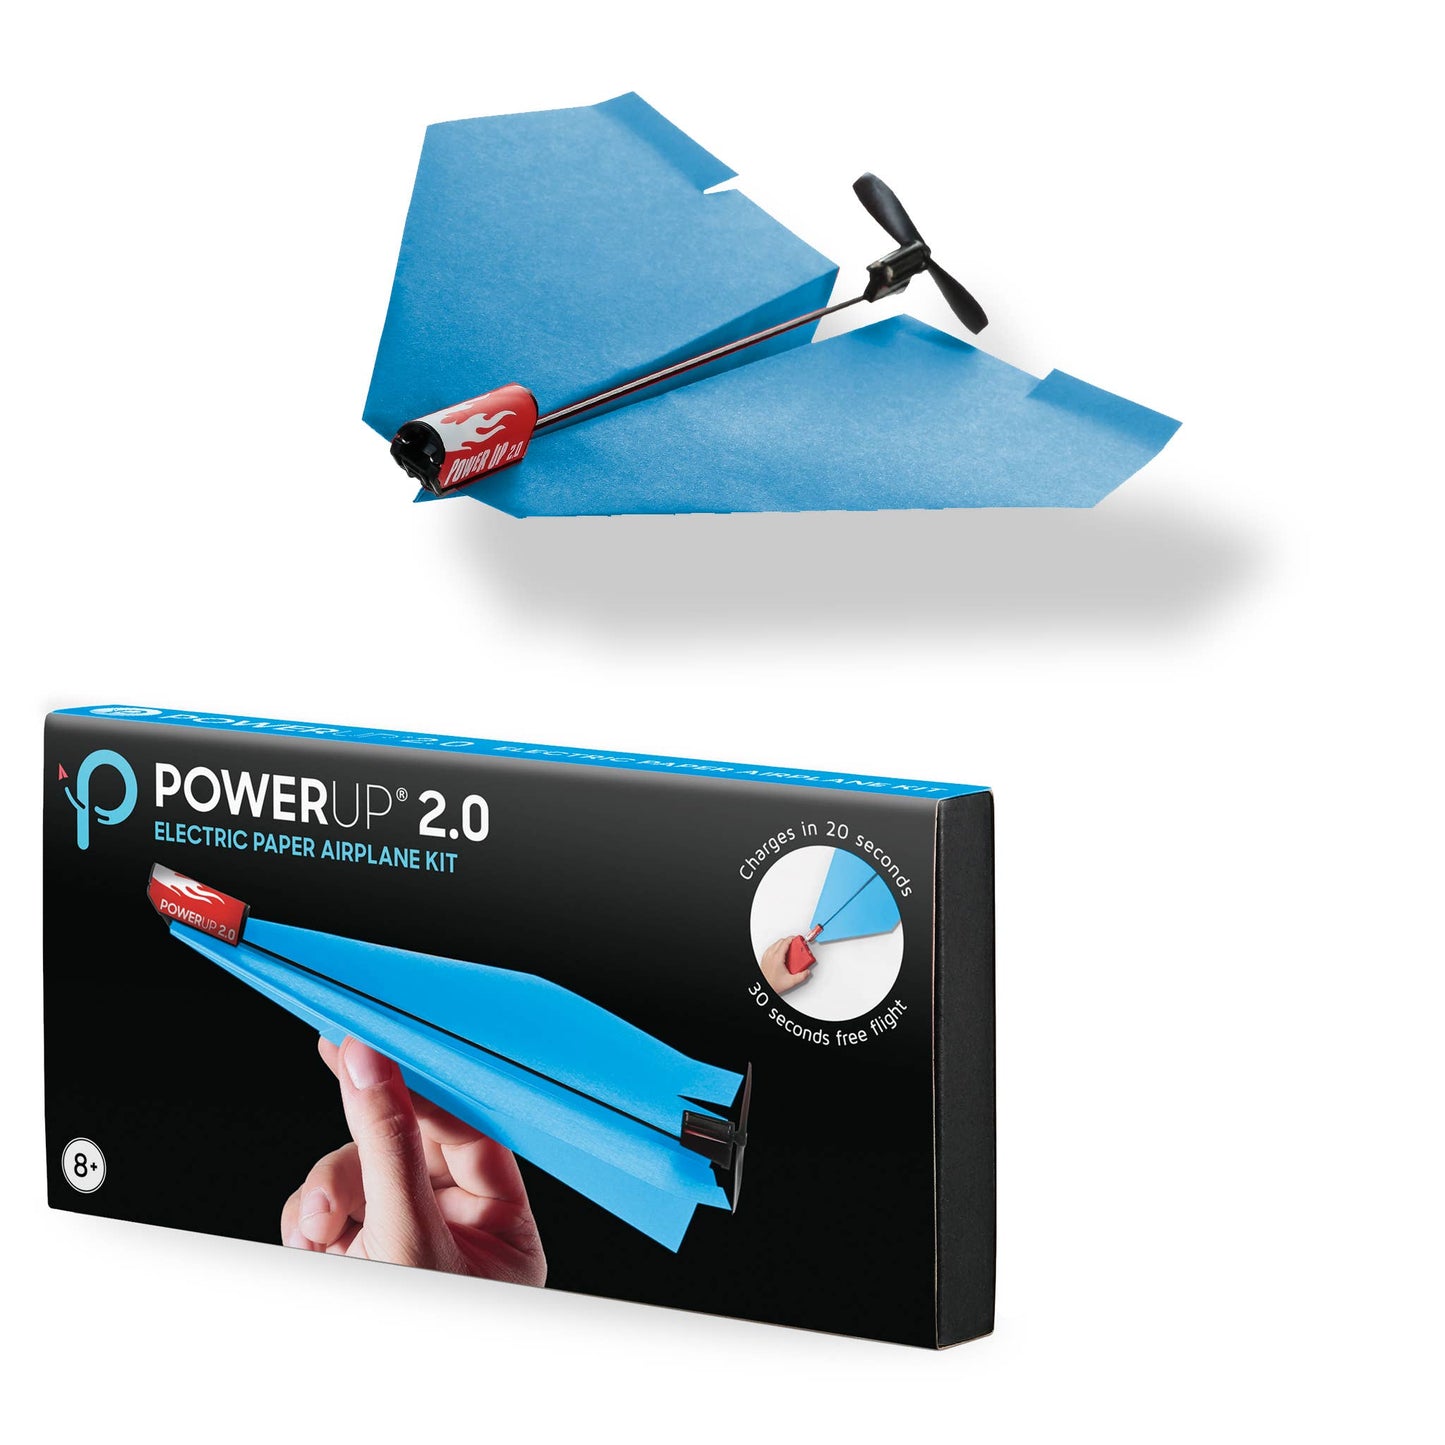 PowerUp 2.0 Electric Paper Airplane Kit